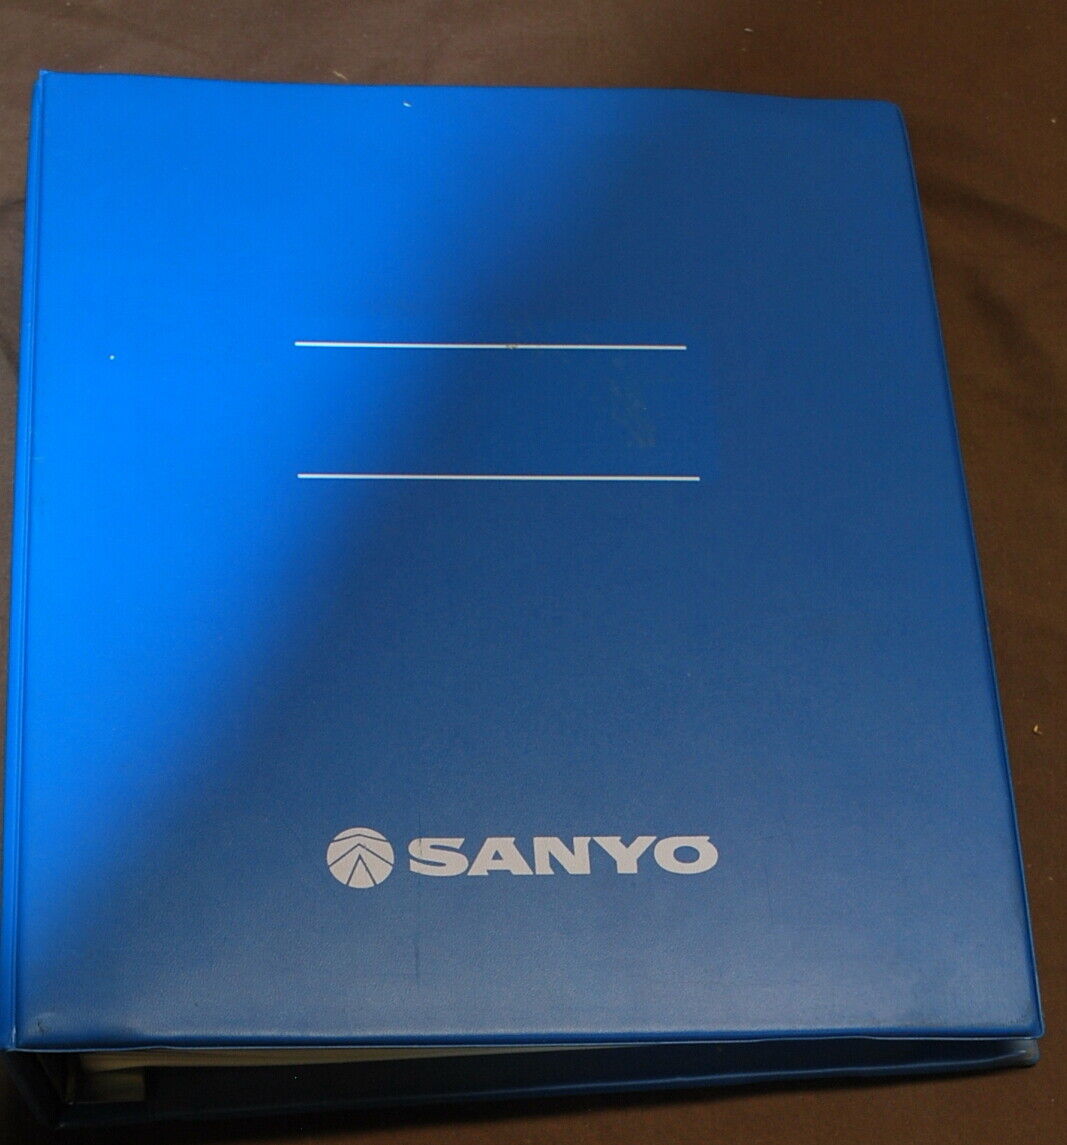 Sanyo MBC-1100 Series User\'s Guide and Software Encyclopedia - ships worldwide